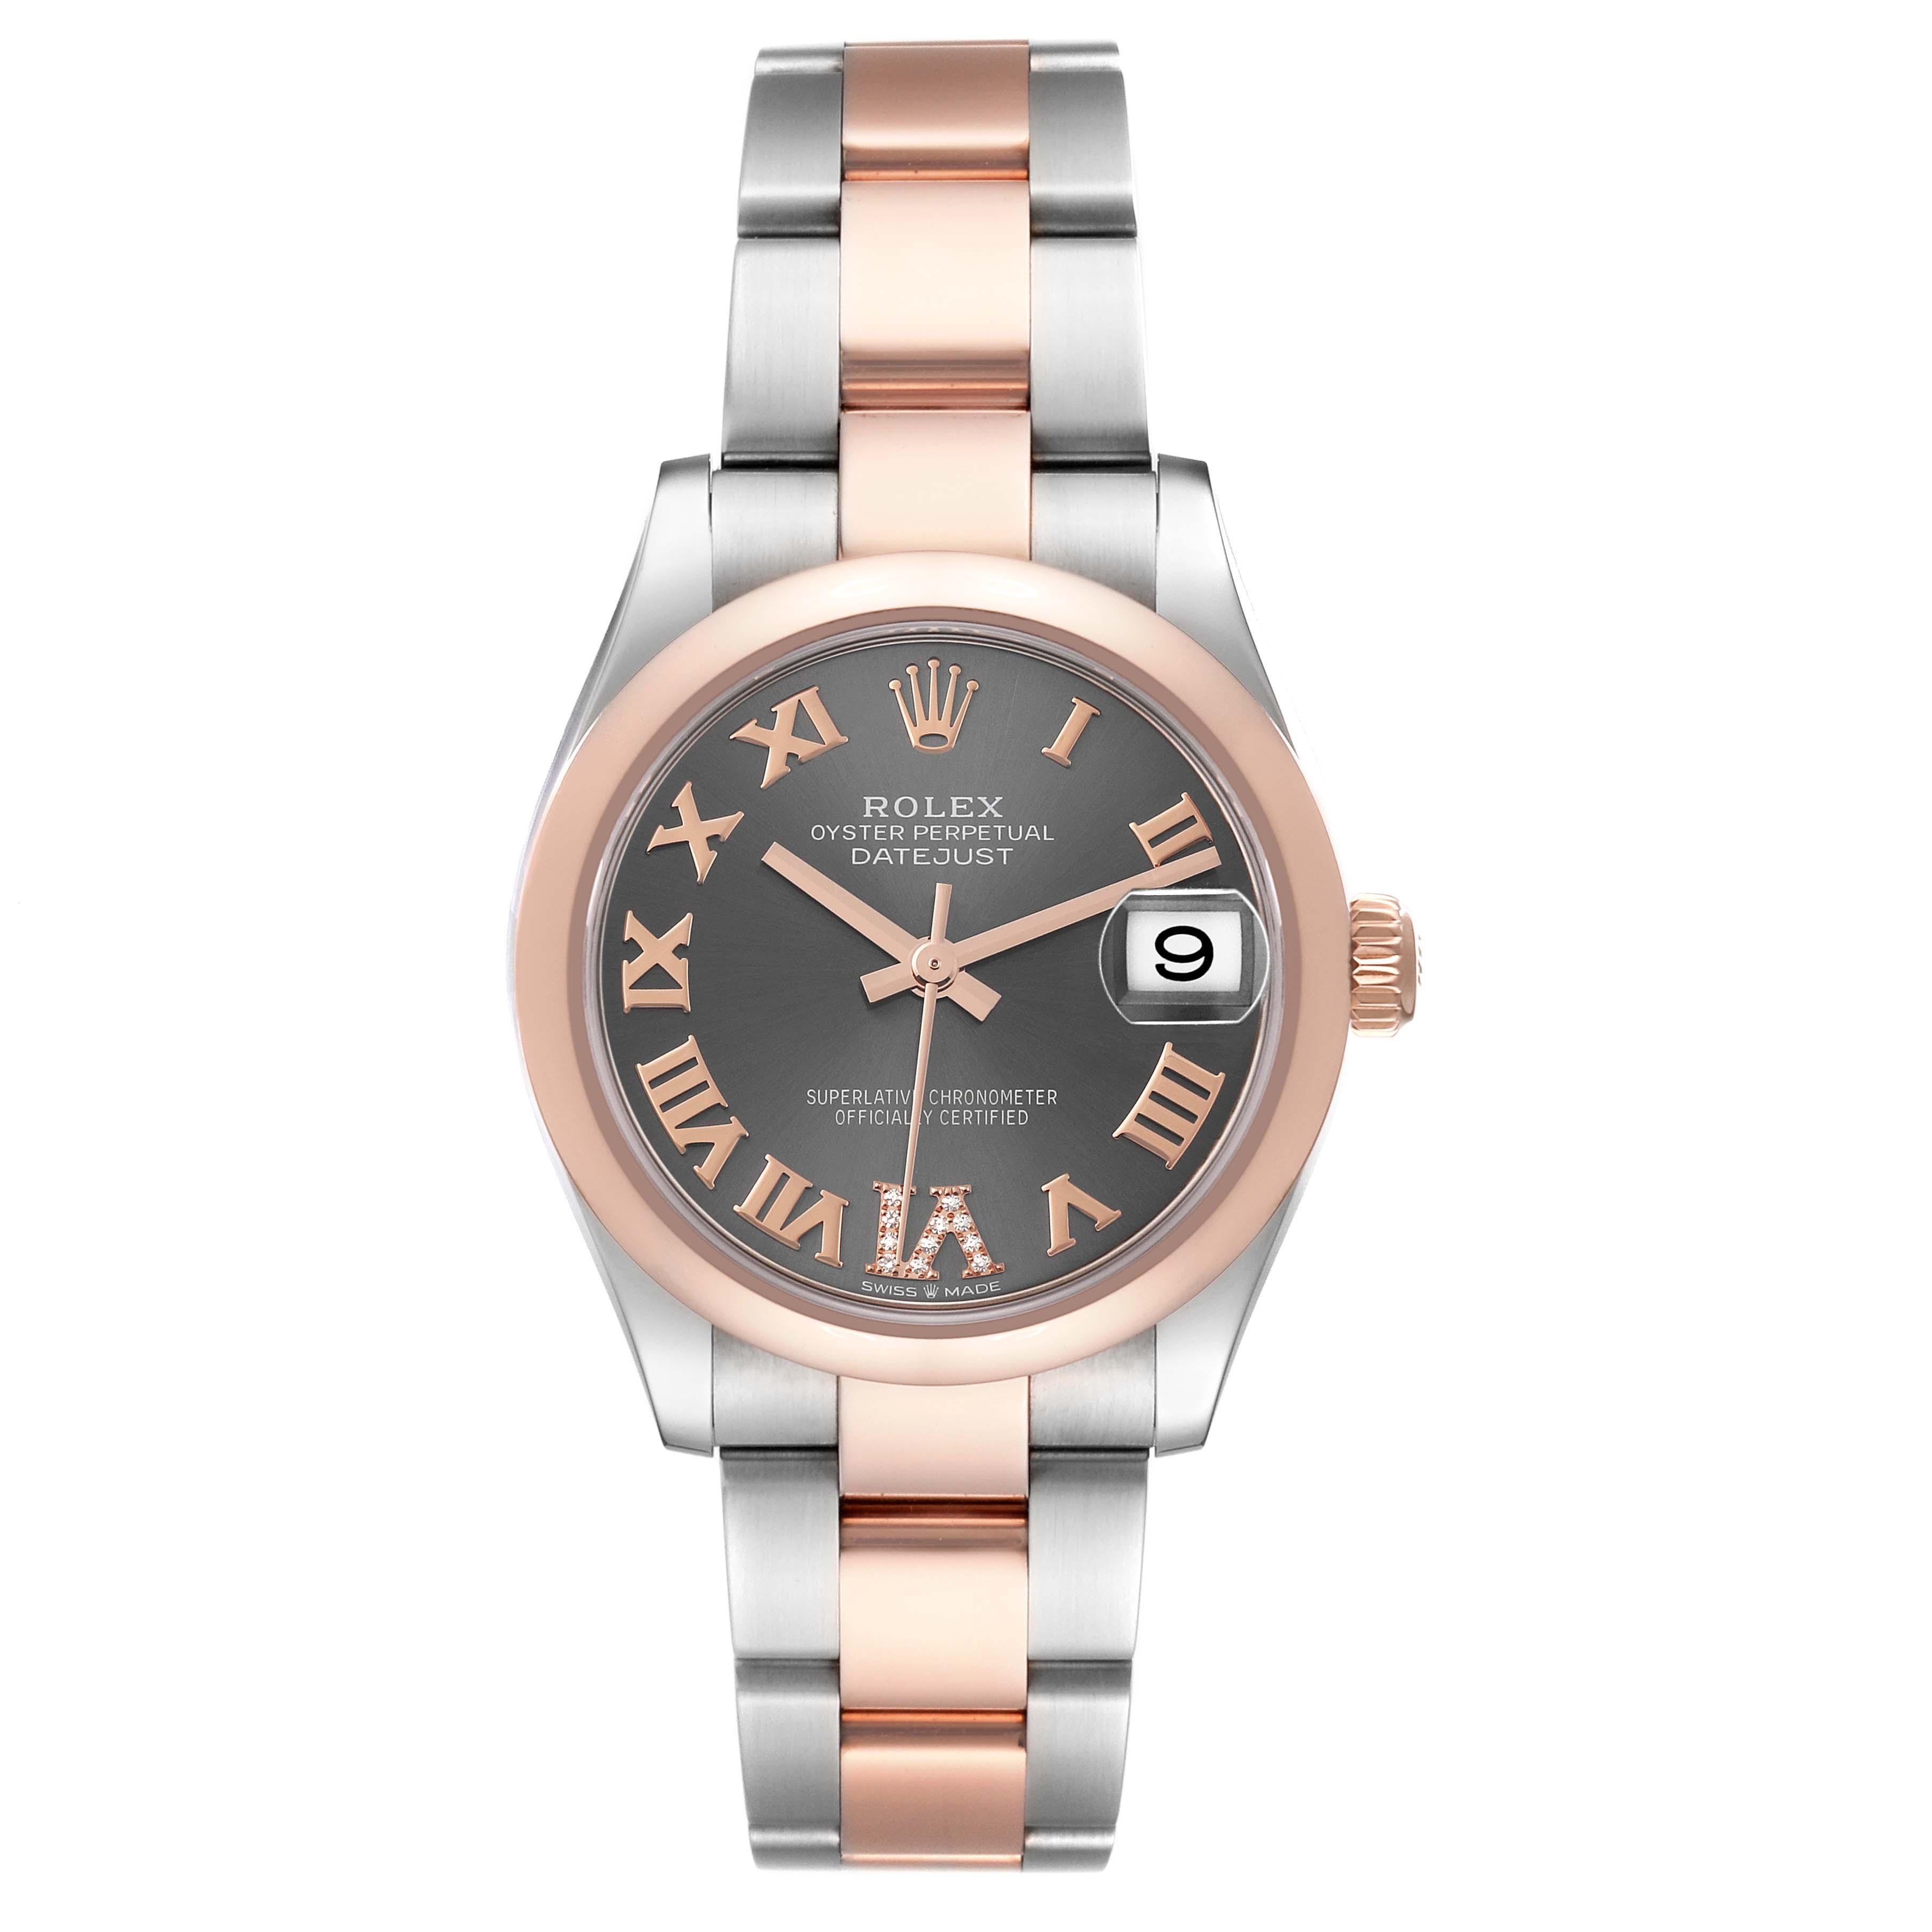 Rolex Datejust Midsize Steel Rose Gold Slate Dial Ladies Watch 278241 Box Card. Officially certified chronometer automatic self-winding movement with quickset date function. Stainless steel oyster case 31.0 mm in diameter. Rolex logo on an 18k